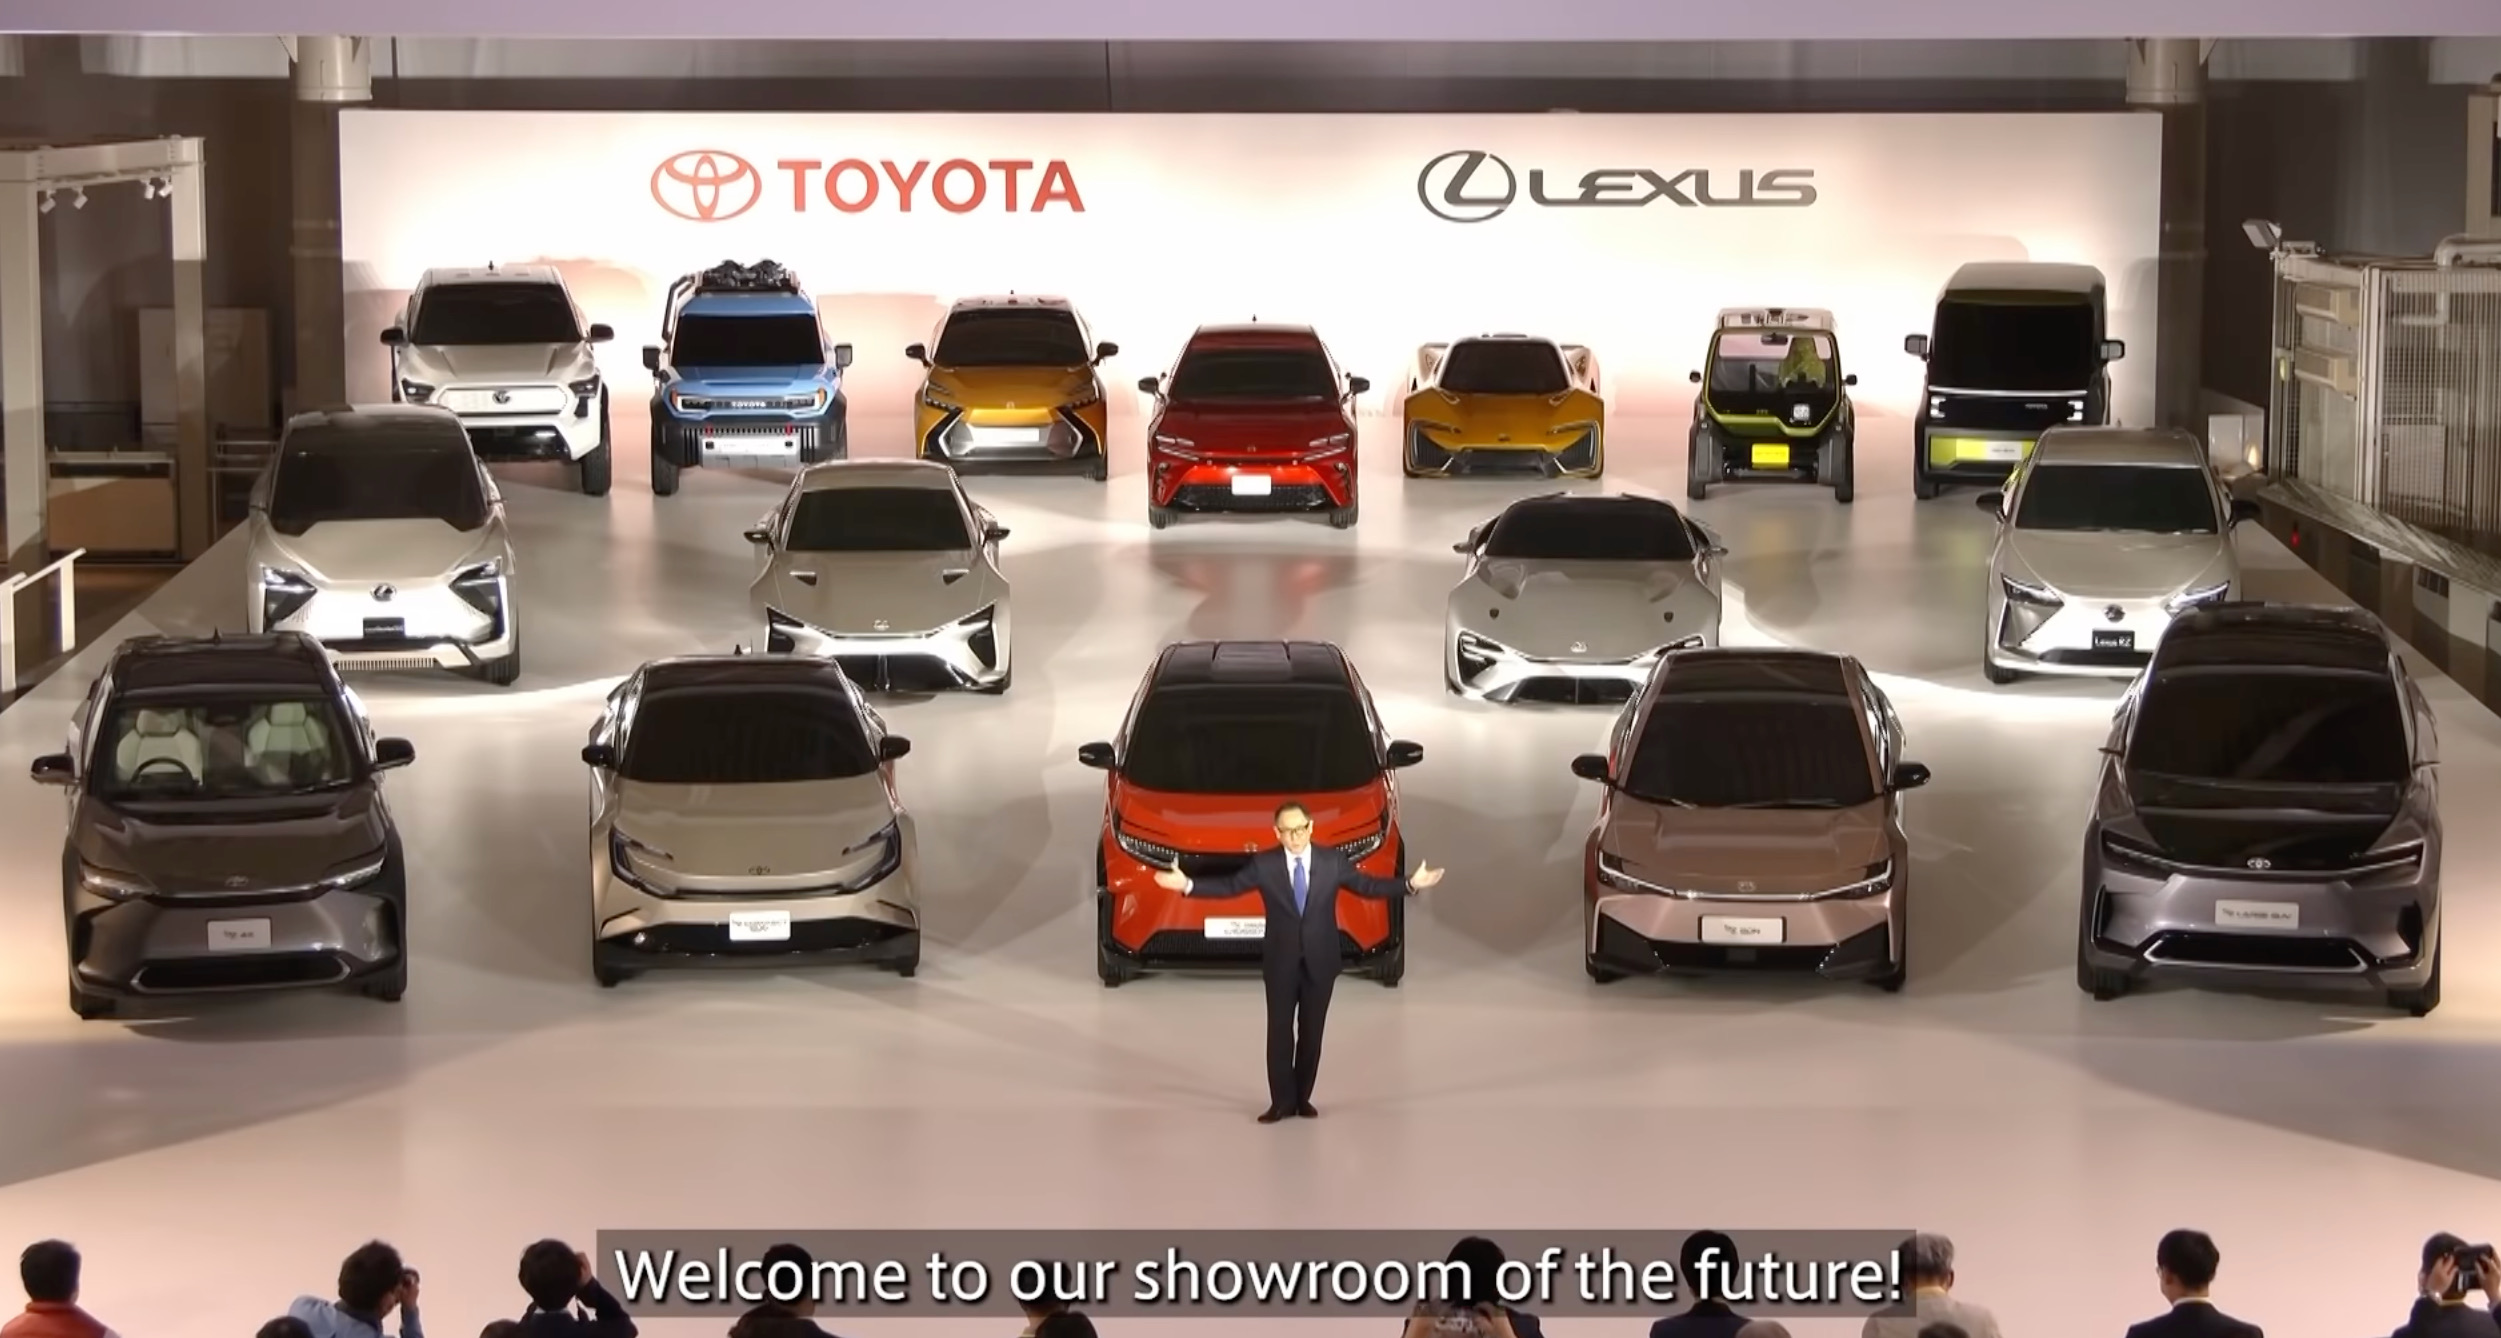 Toyota overhauling EV strategy to keep up with industry’s fast adoption – report